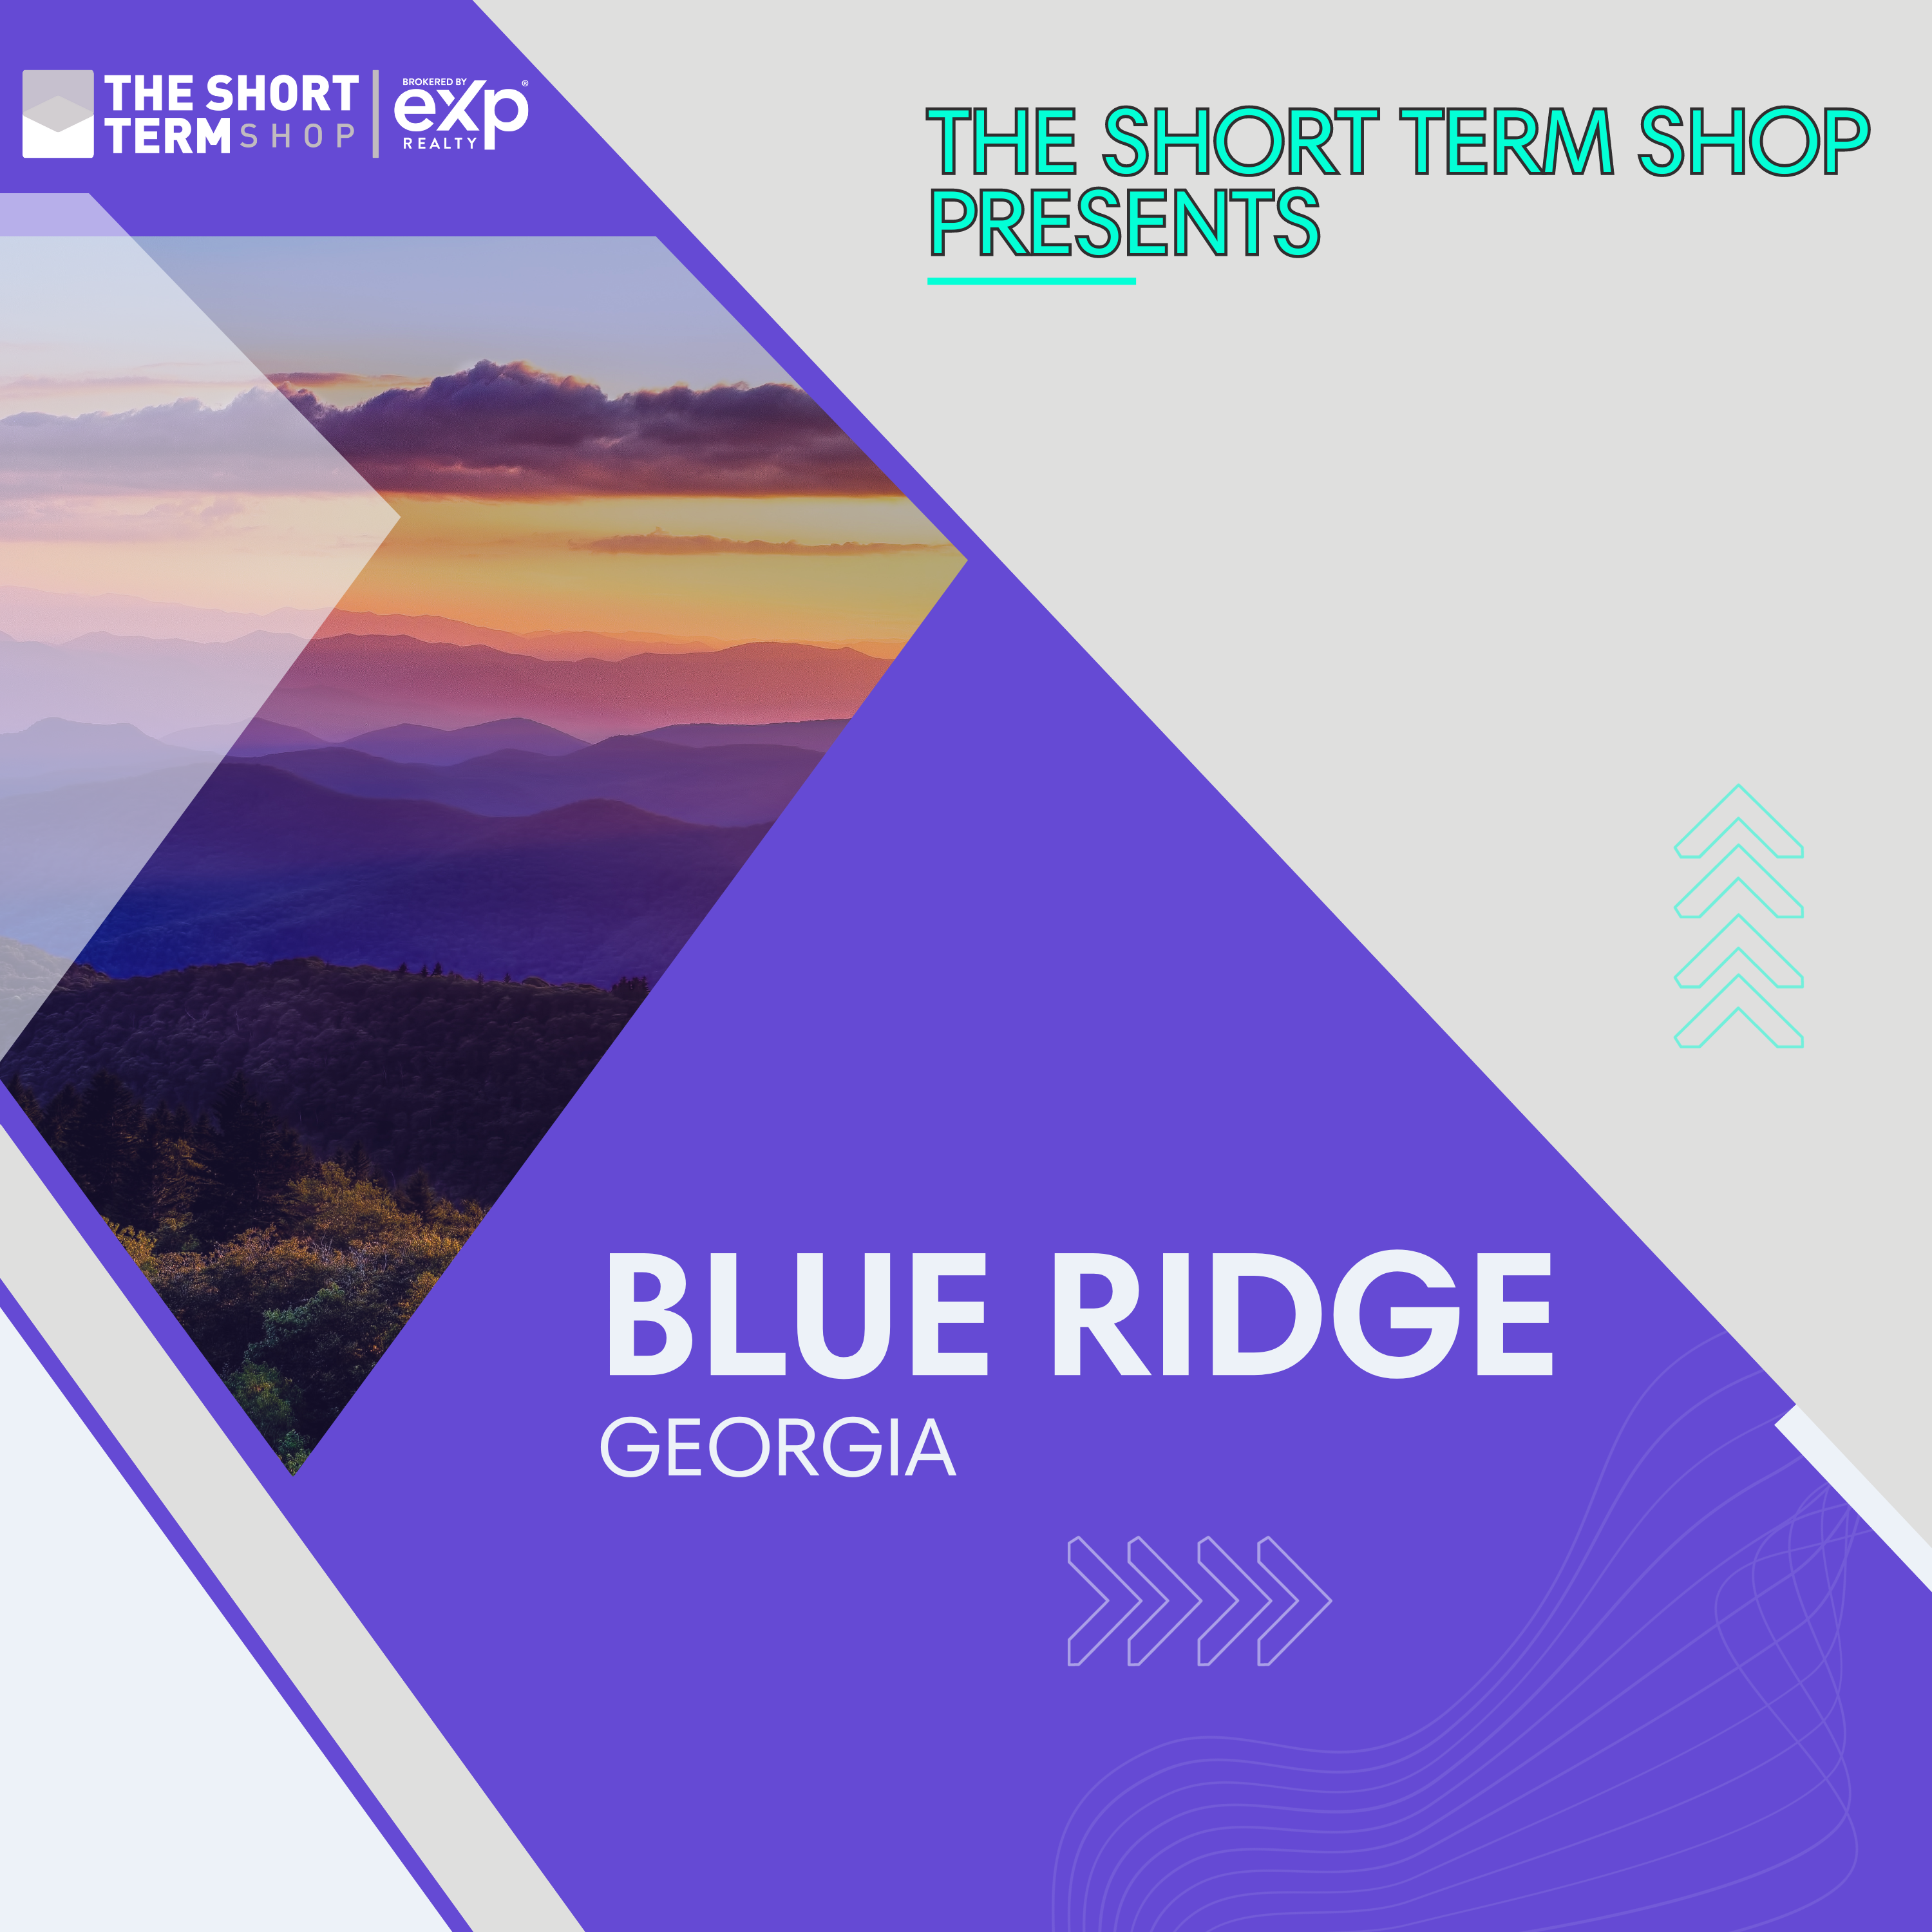 The Real Estate Contract Process When Investing In Short Term Rentals In Blue Ridge, GA